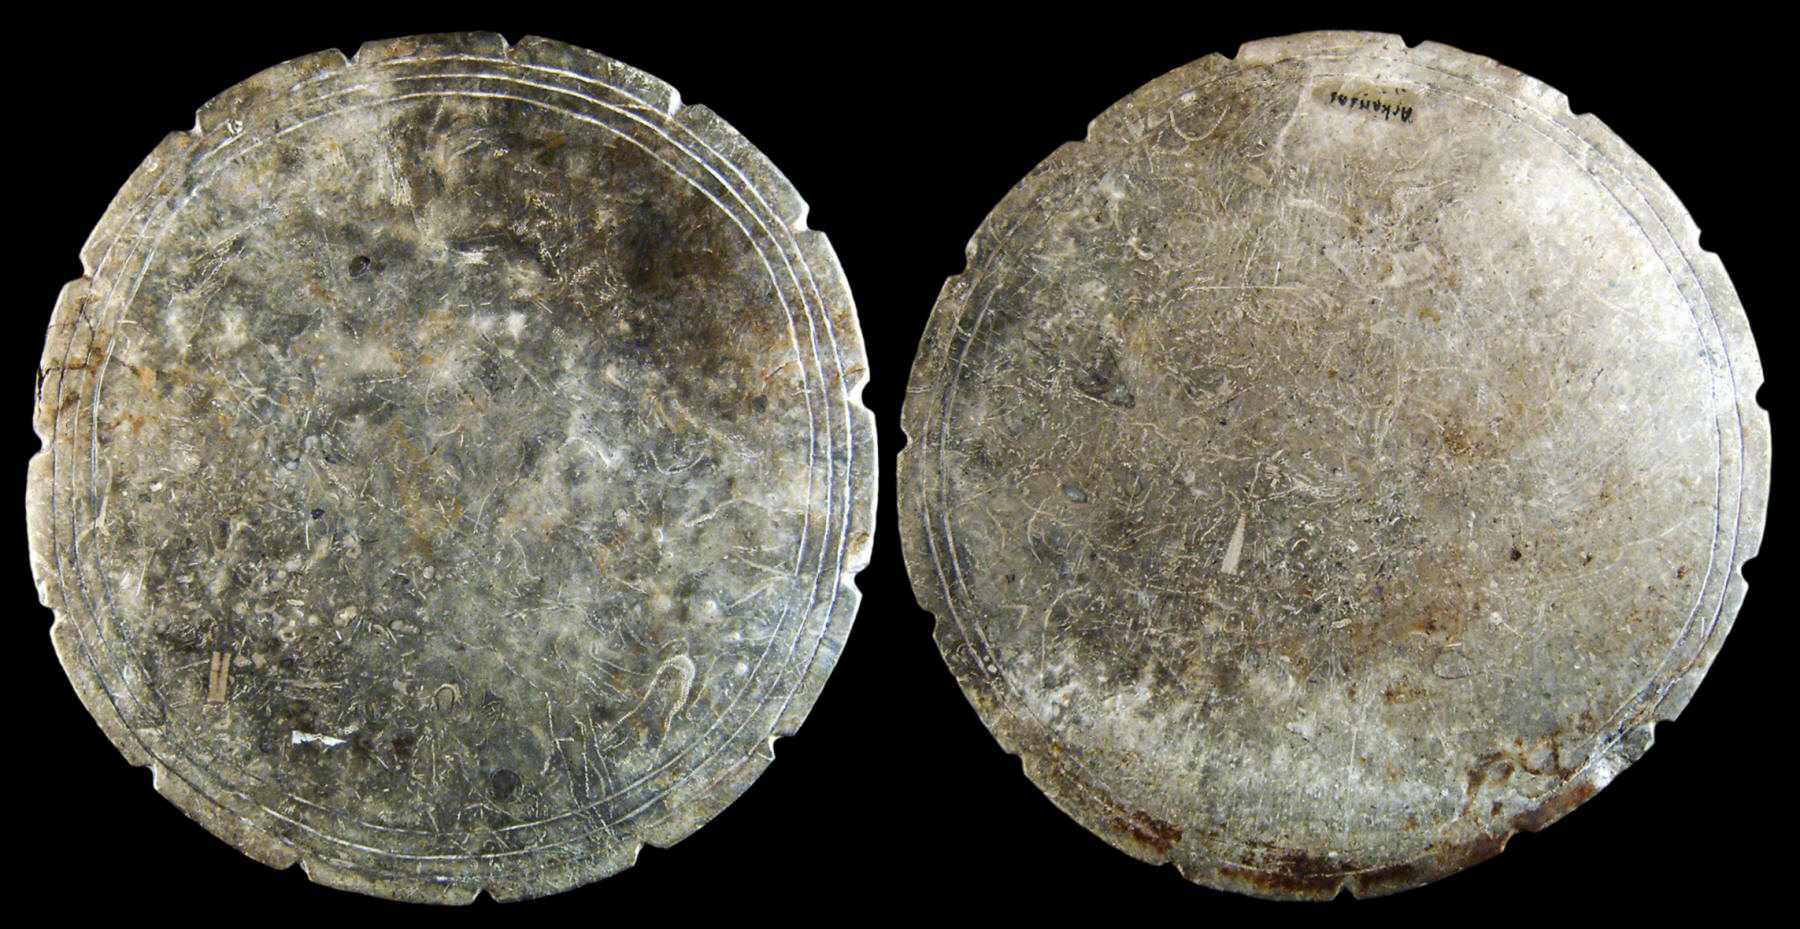 Stone disc palette from the Campbell site in Missouri.